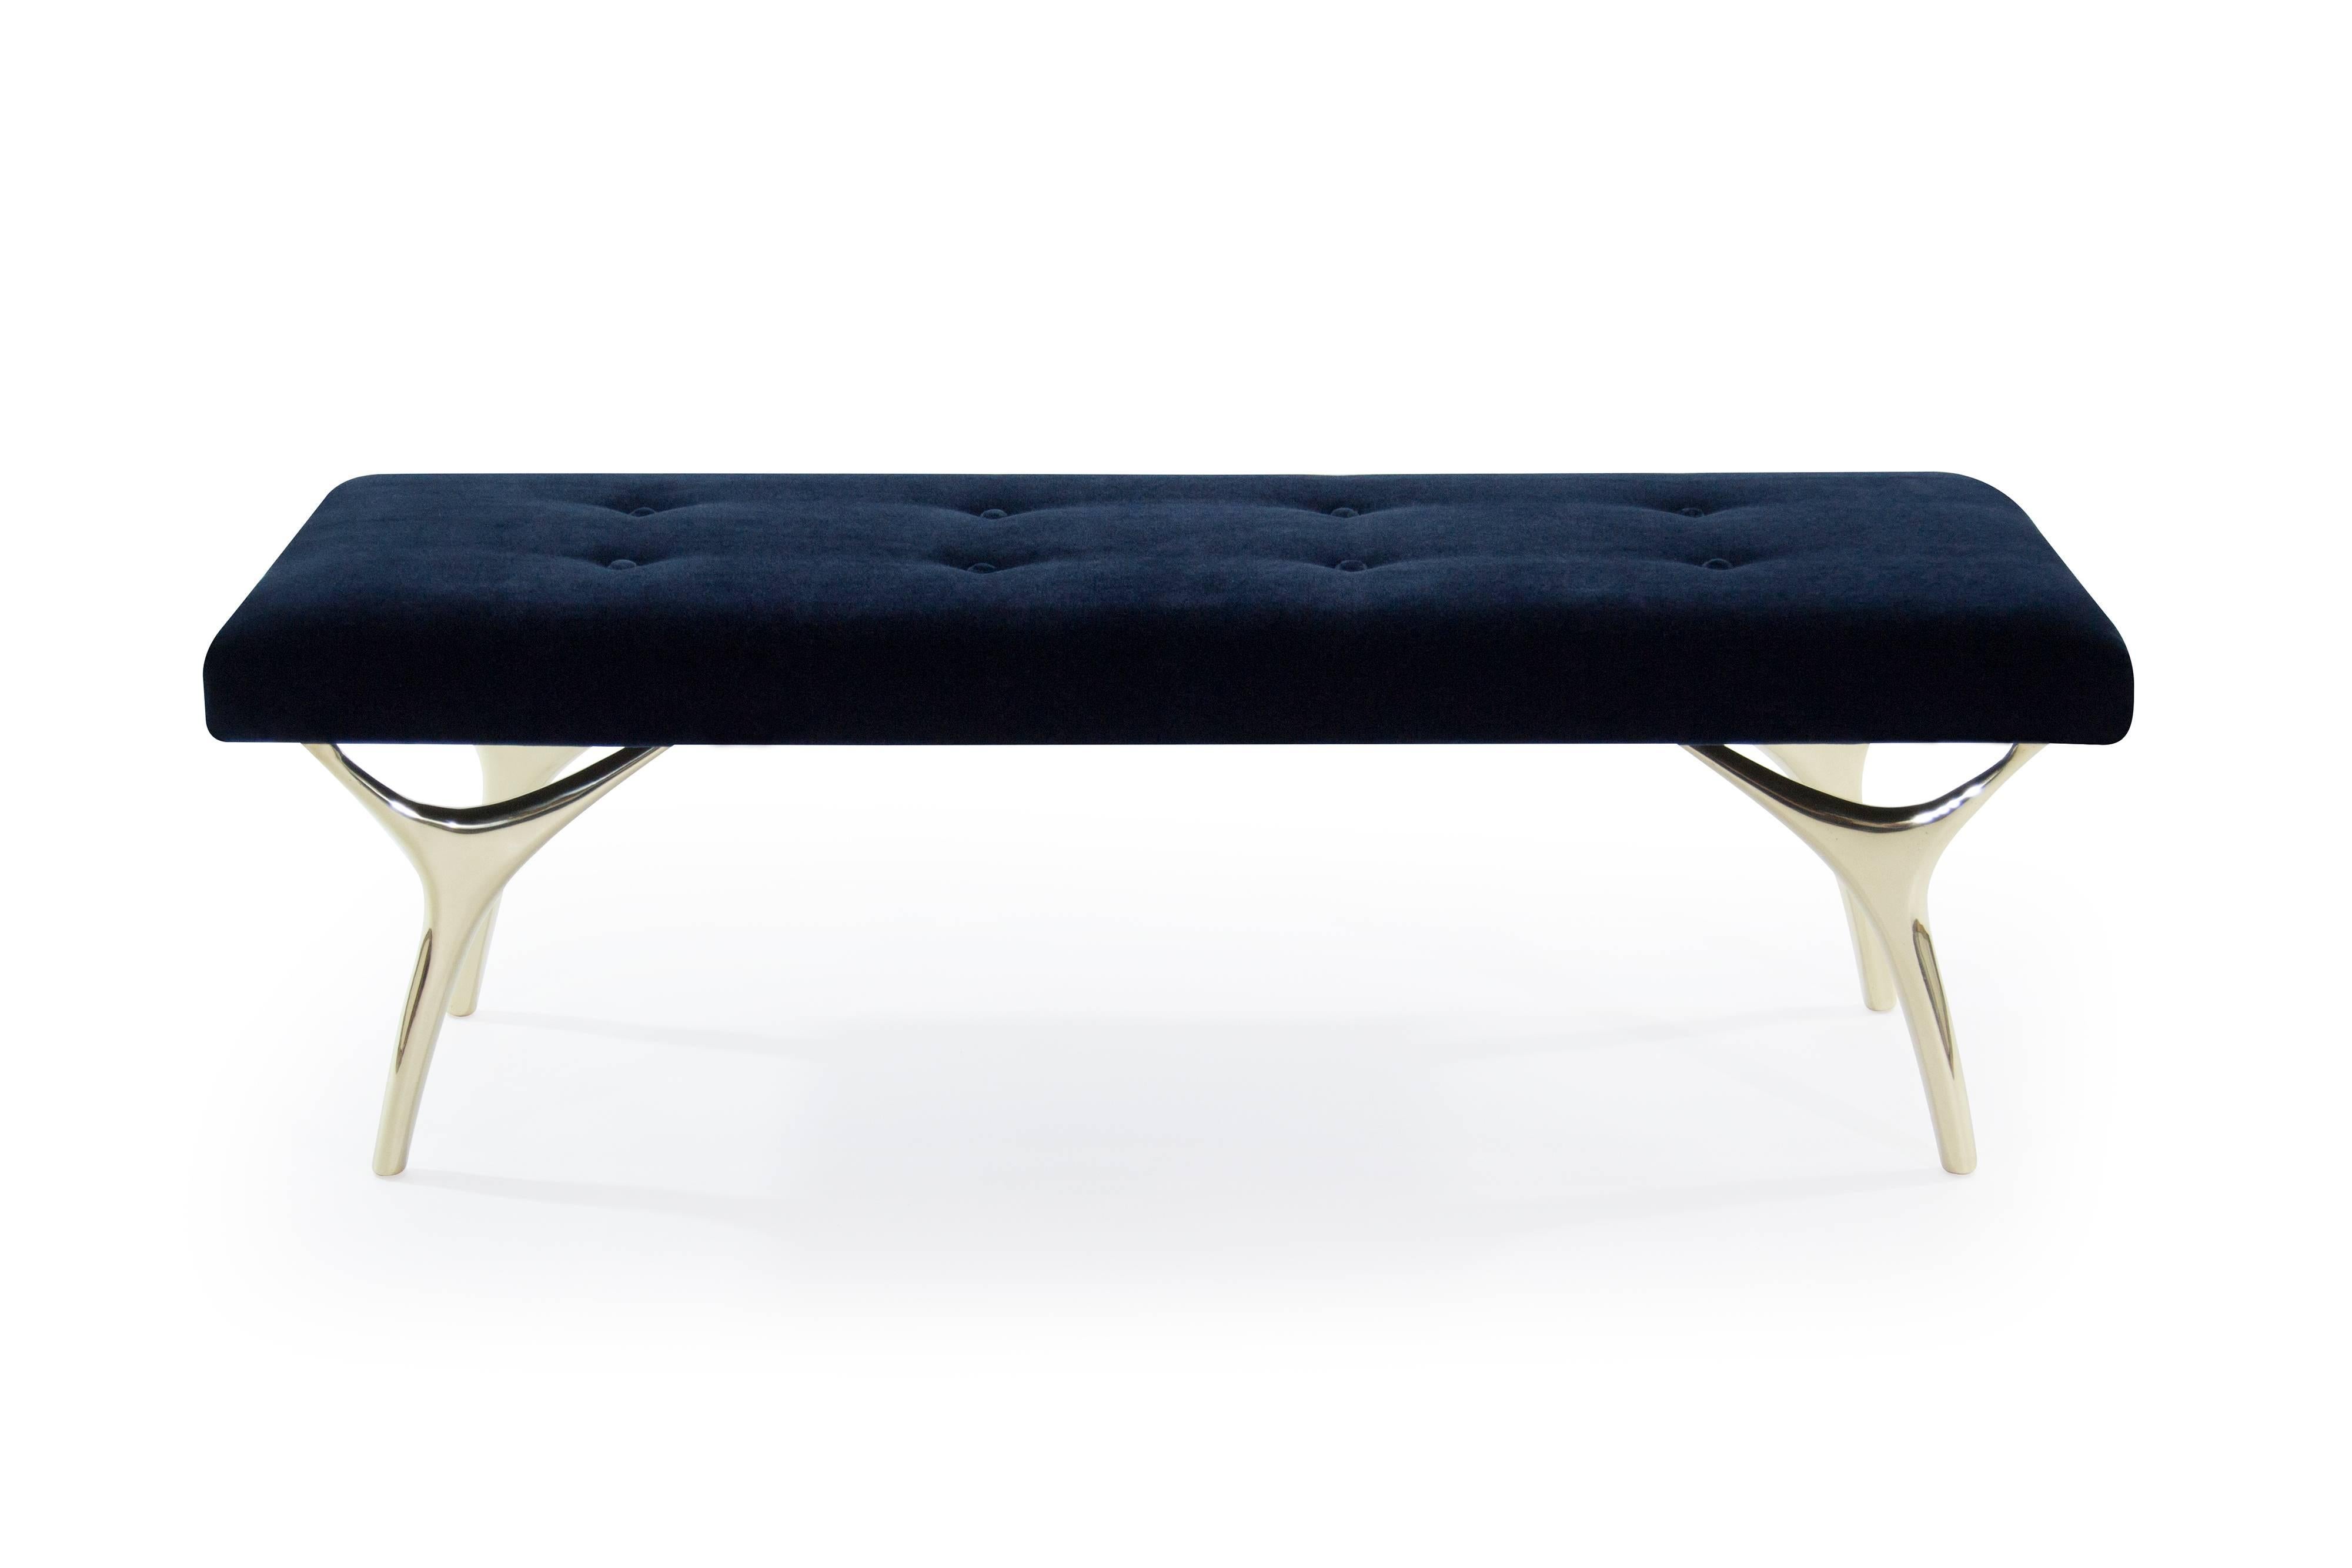 The Crescent Bench by Carlos Solano for Stamford Modern a remarkable blend of elegance, stability, and artistic craftsmanship. This exquisite bench is designed to enhance any space with its captivating presence and exceptional functionality.
